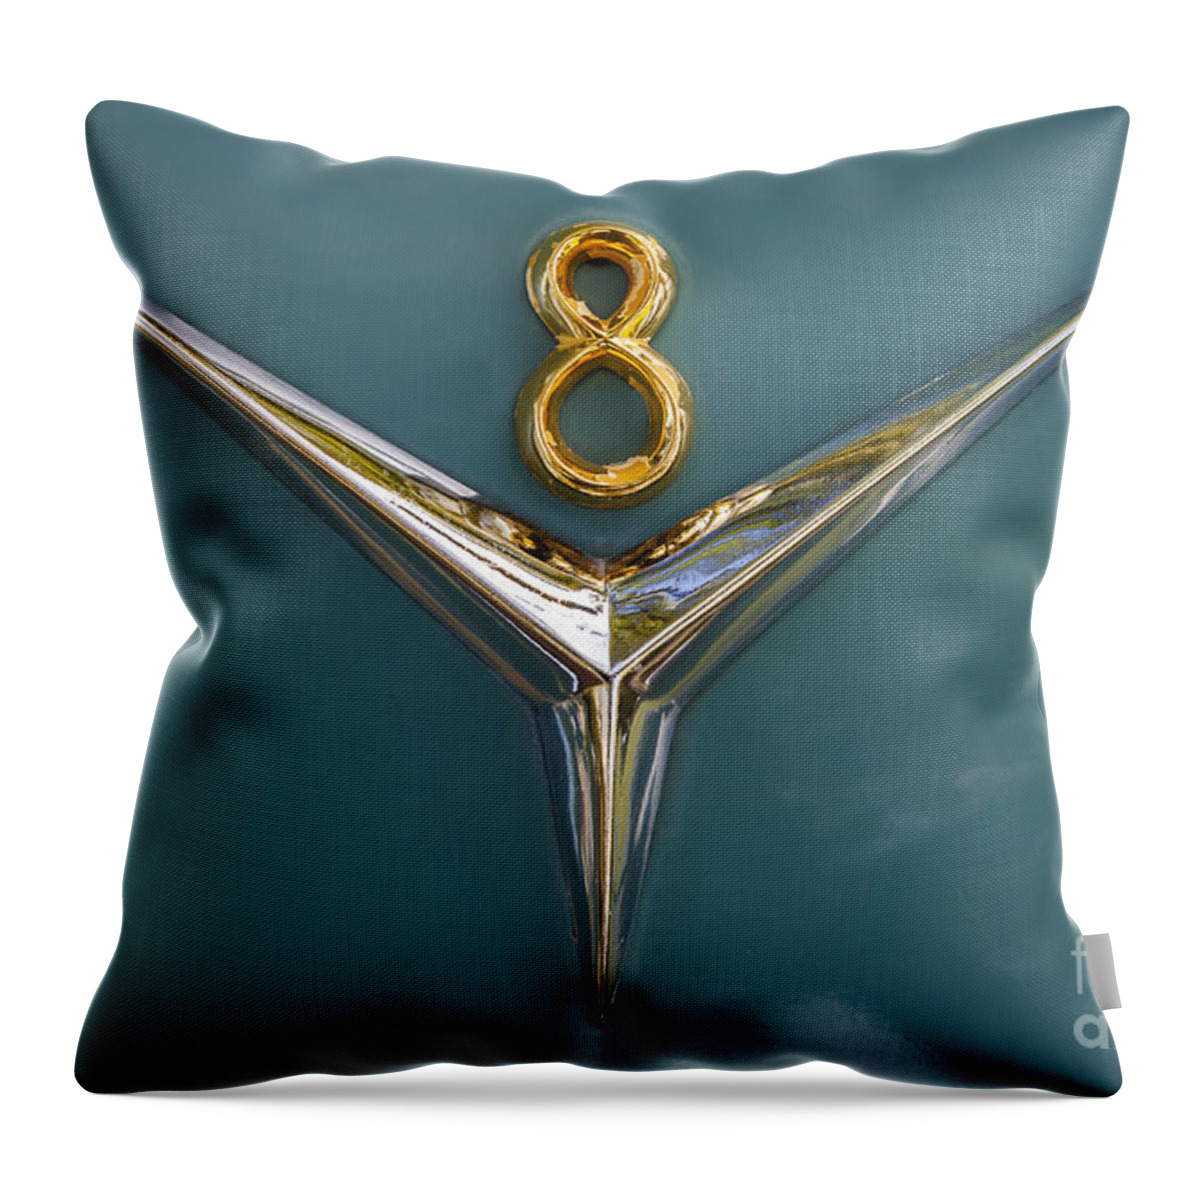 Studebaker Throw Pillow featuring the photograph Studebaker V8 by Dennis Hedberg